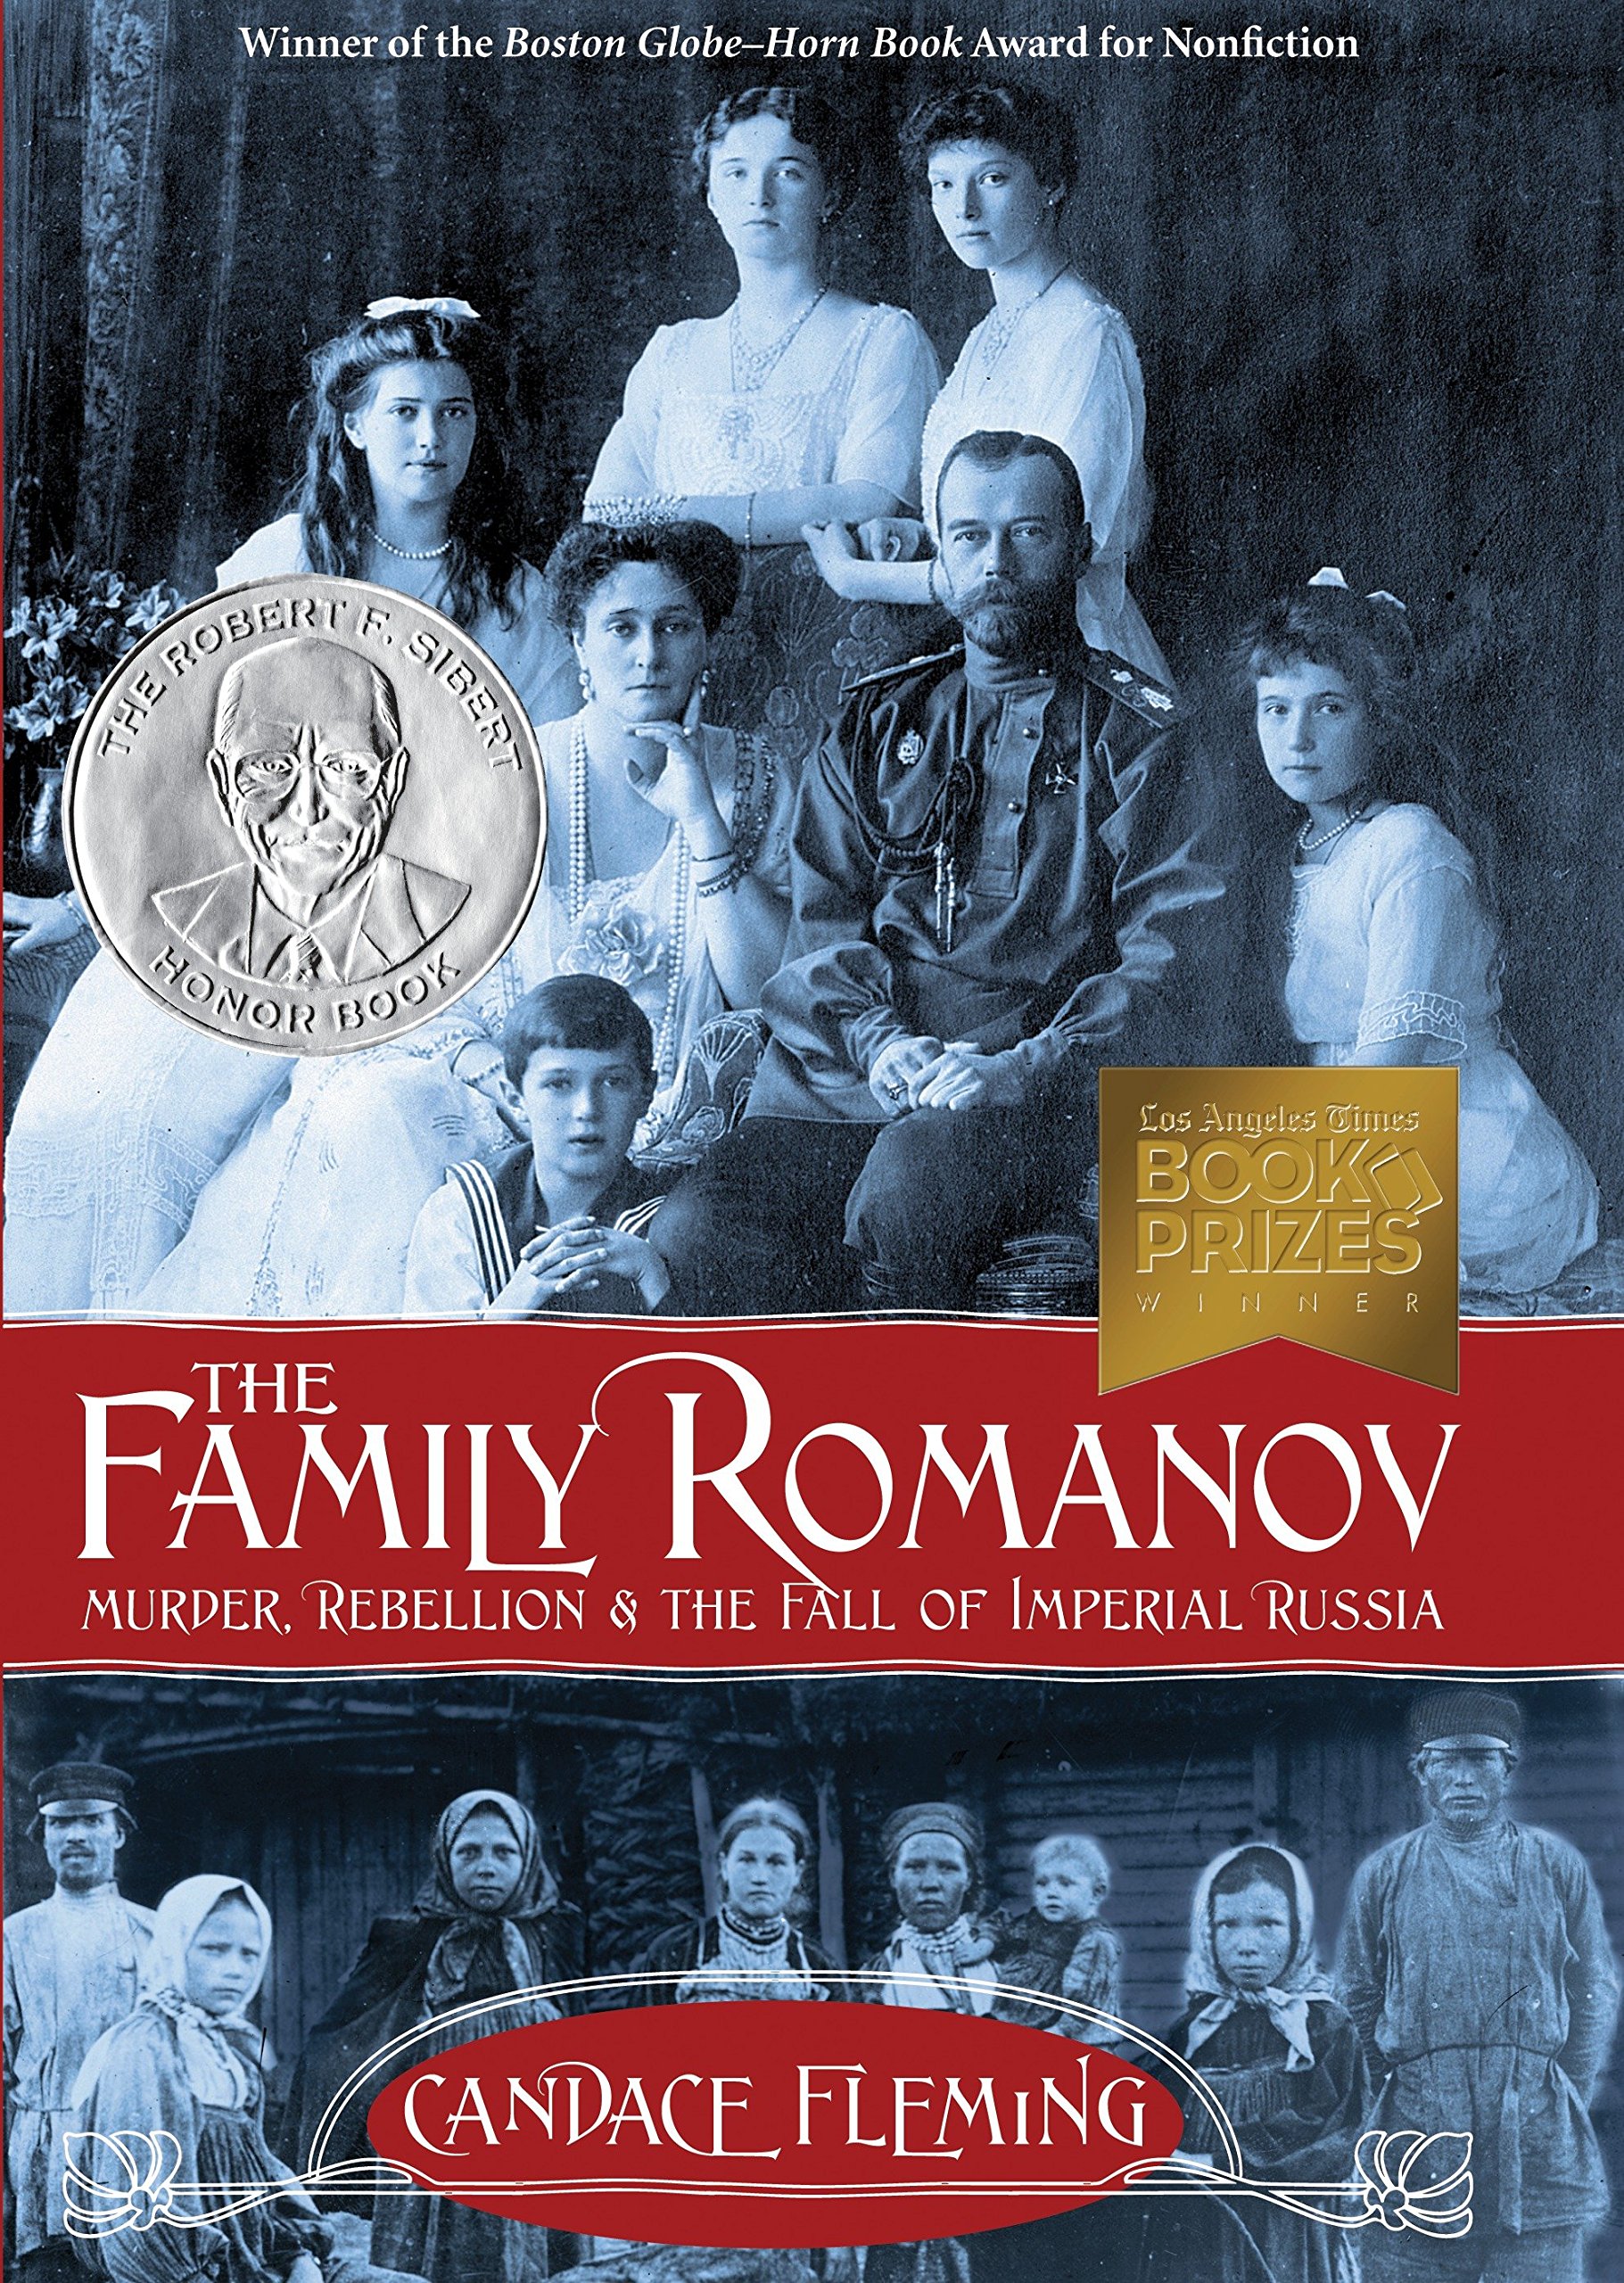 book cover for The Family Romanov by Candace Fleming.